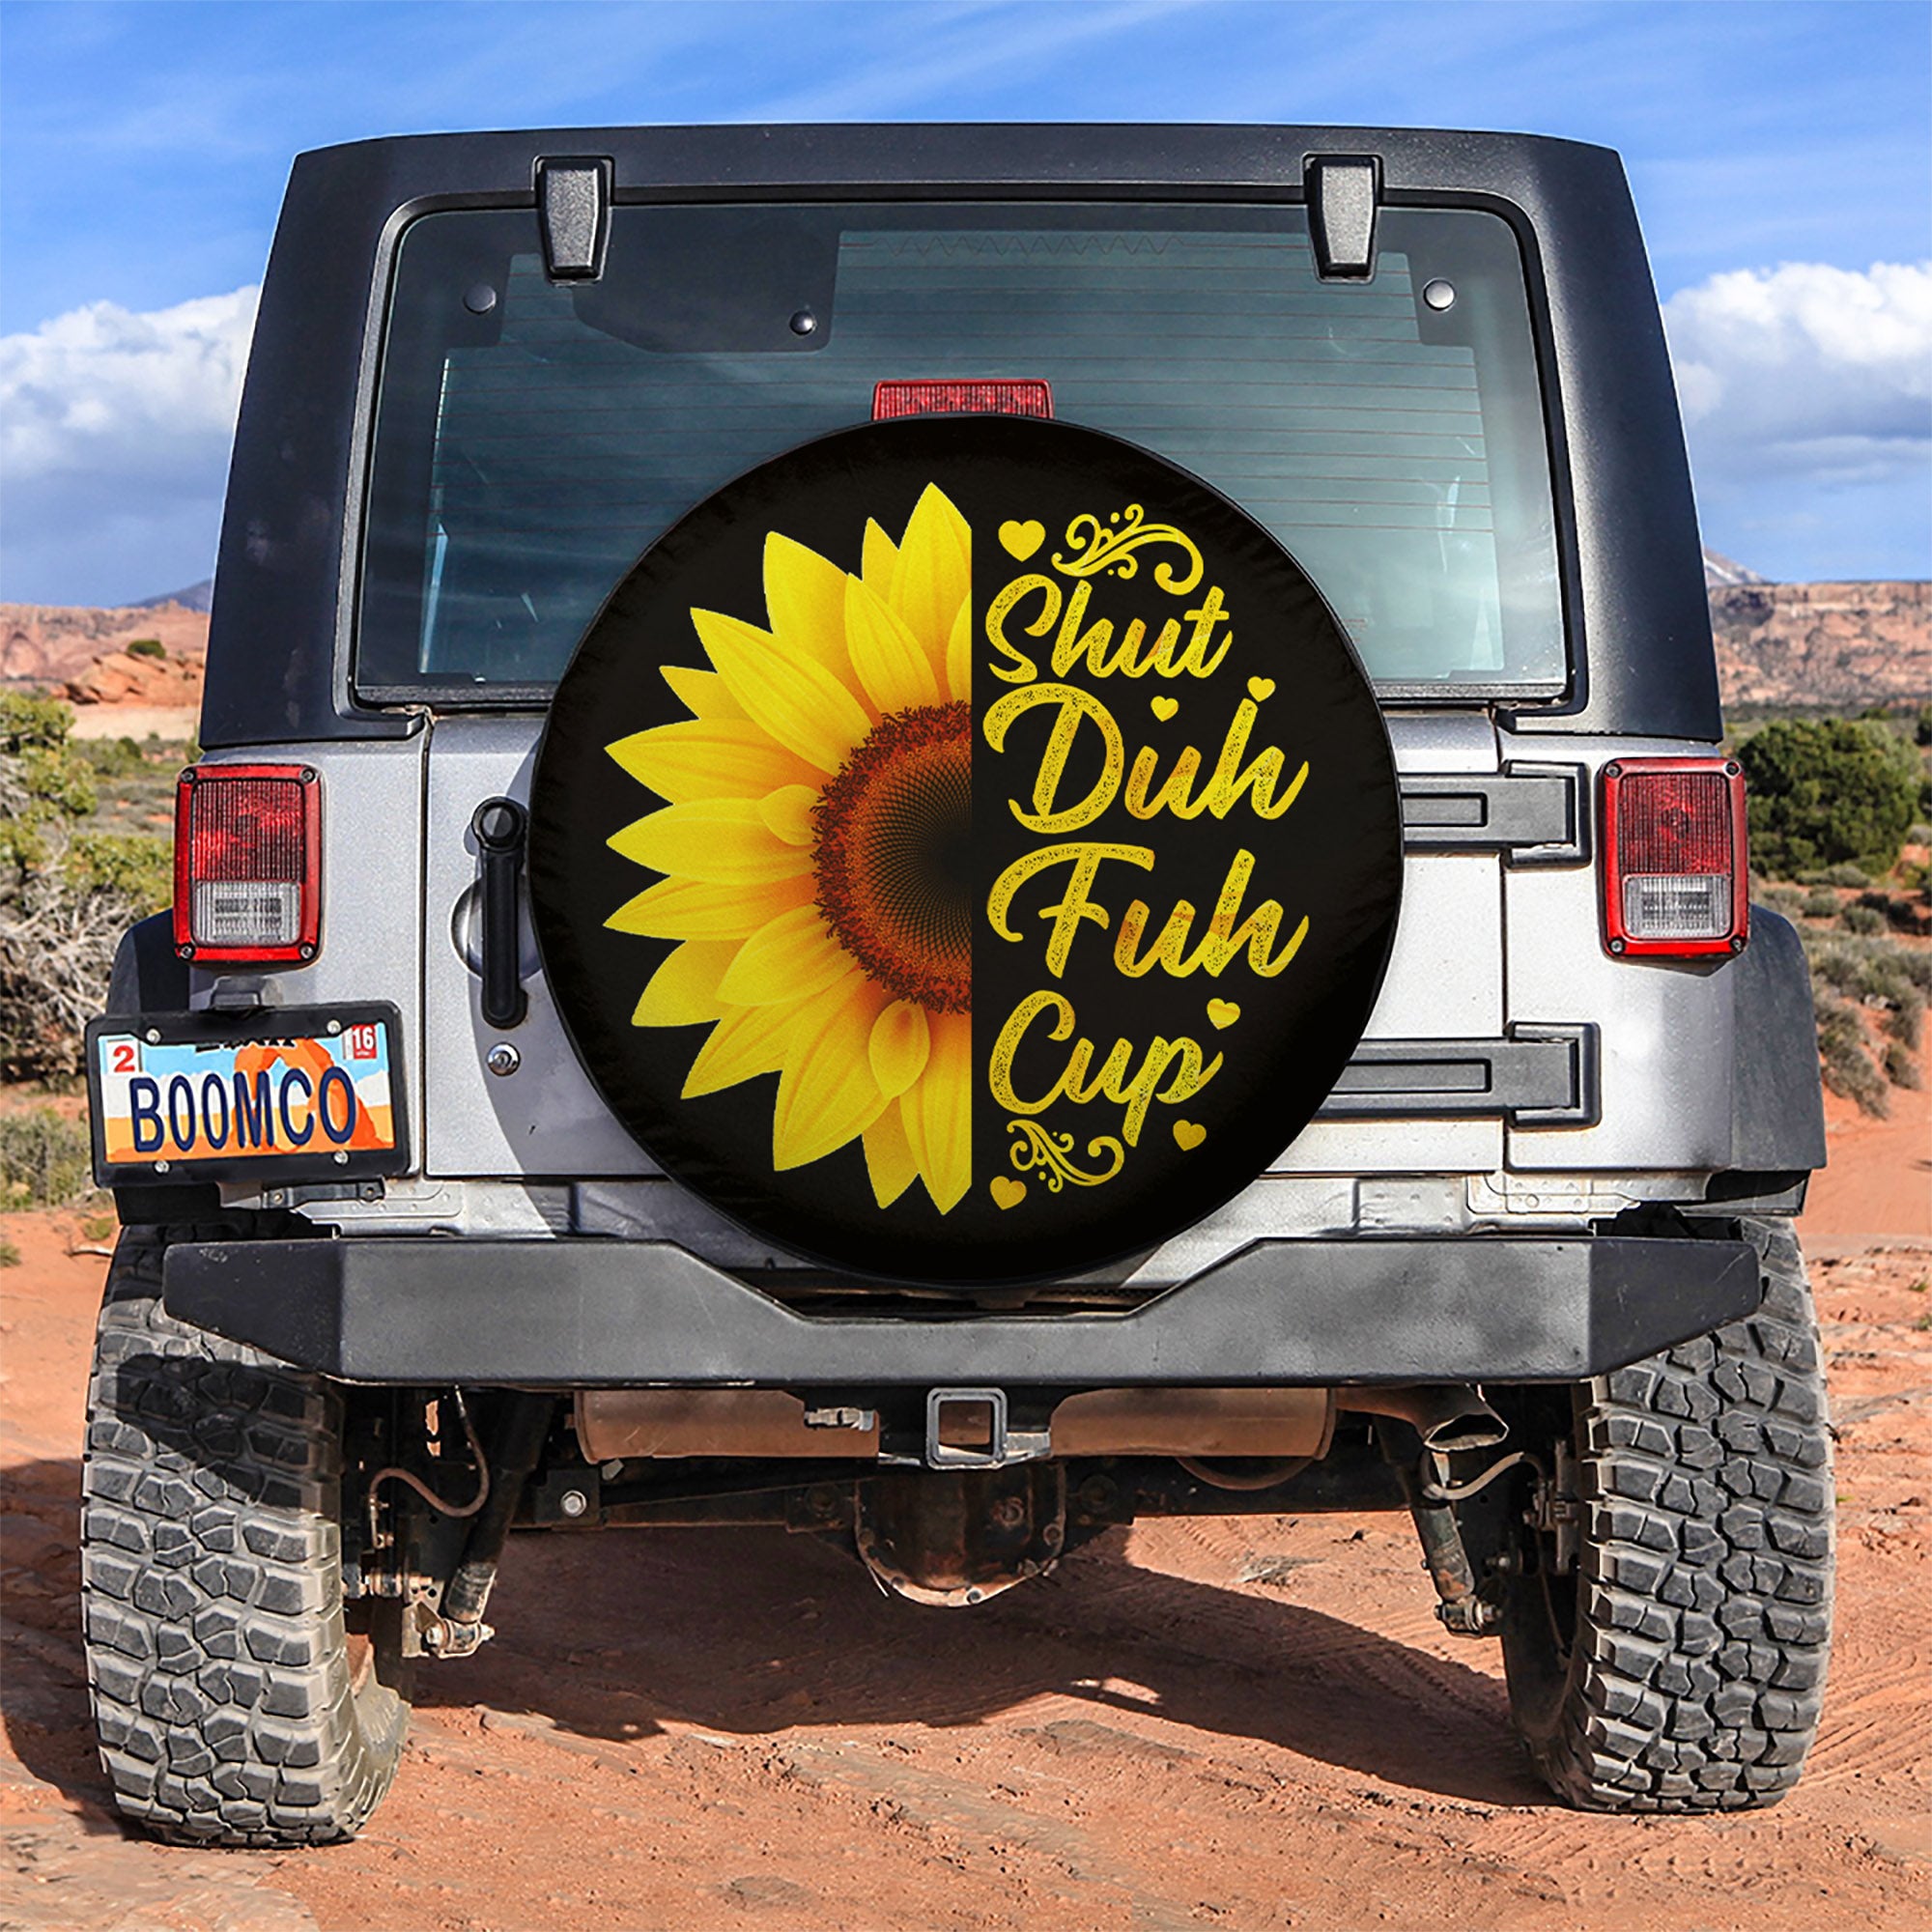 Sunflower Shut Duh Fuh Cup Car Spare Tire Covers Gift For Campers Nearkii